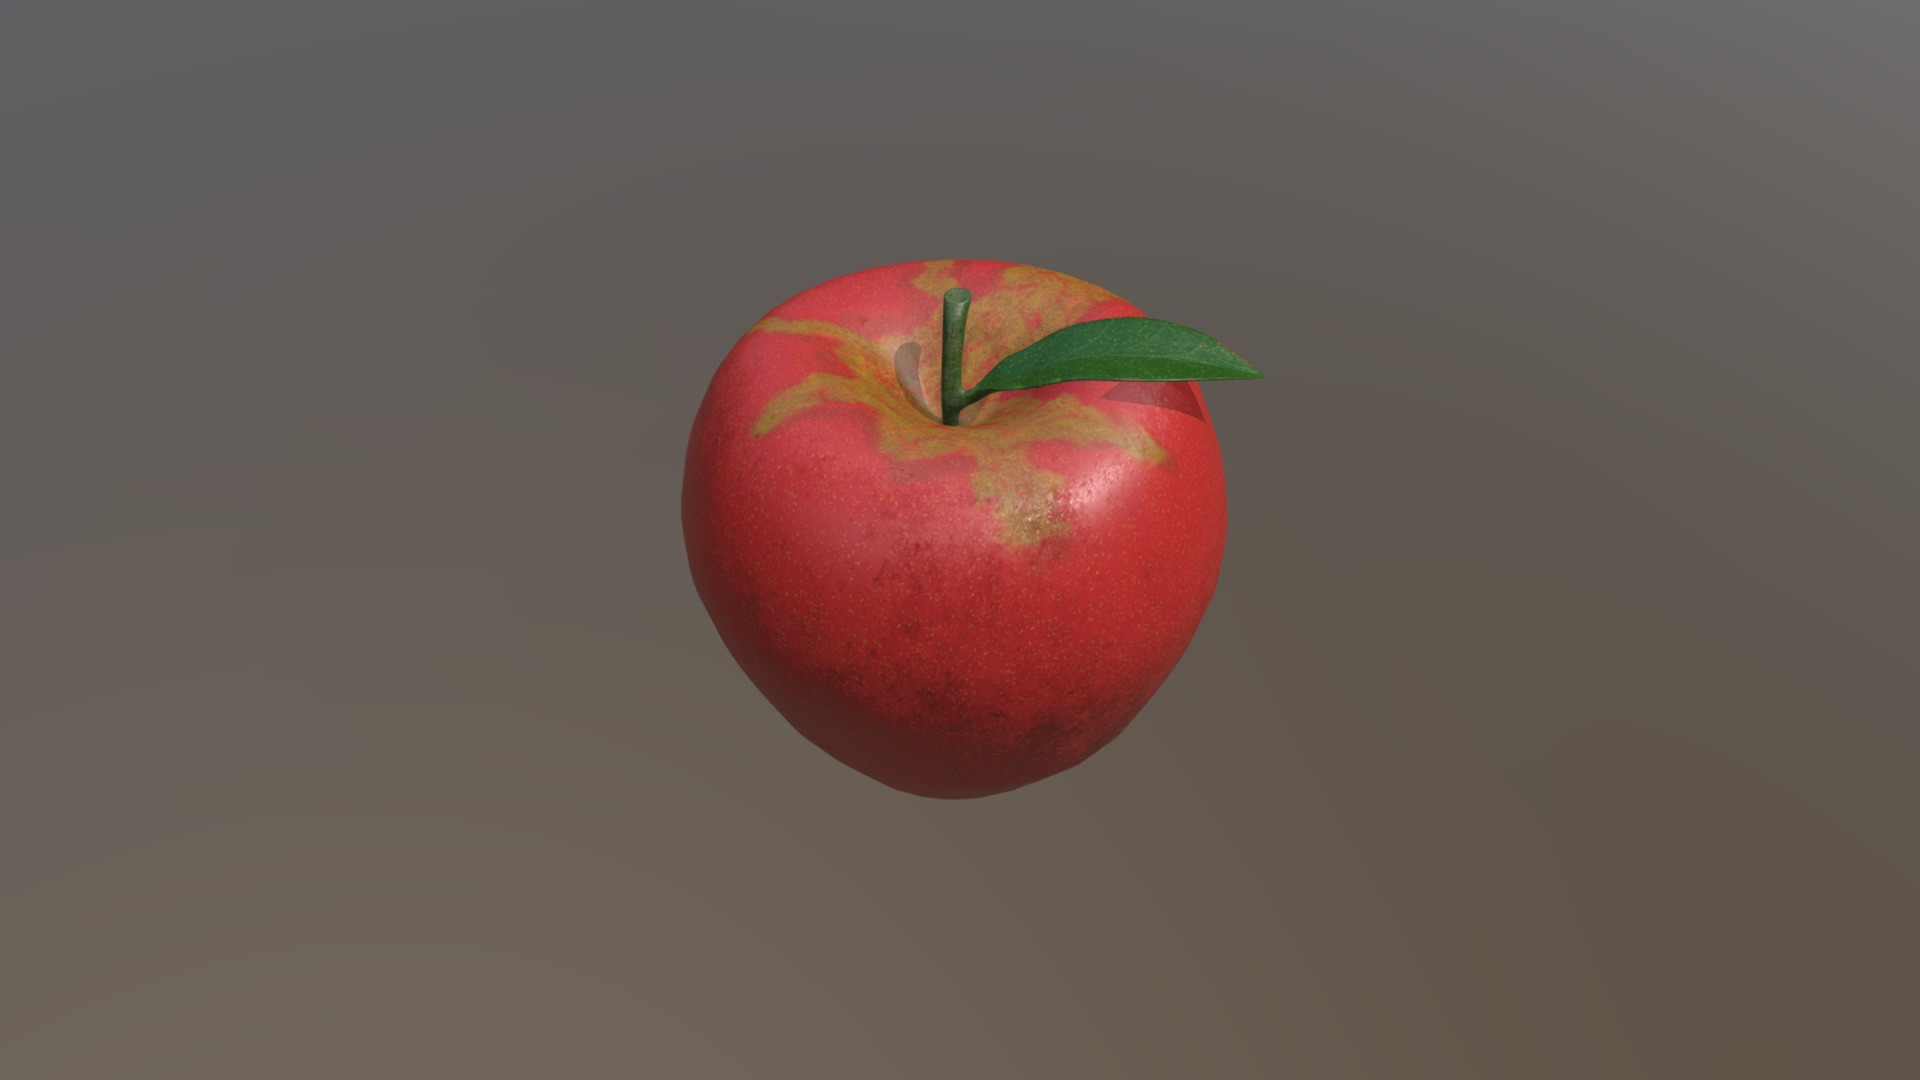 3D model Apple Red - This is a 3D model of the Apple Red. The 3D model is about a red apple with a green stem.